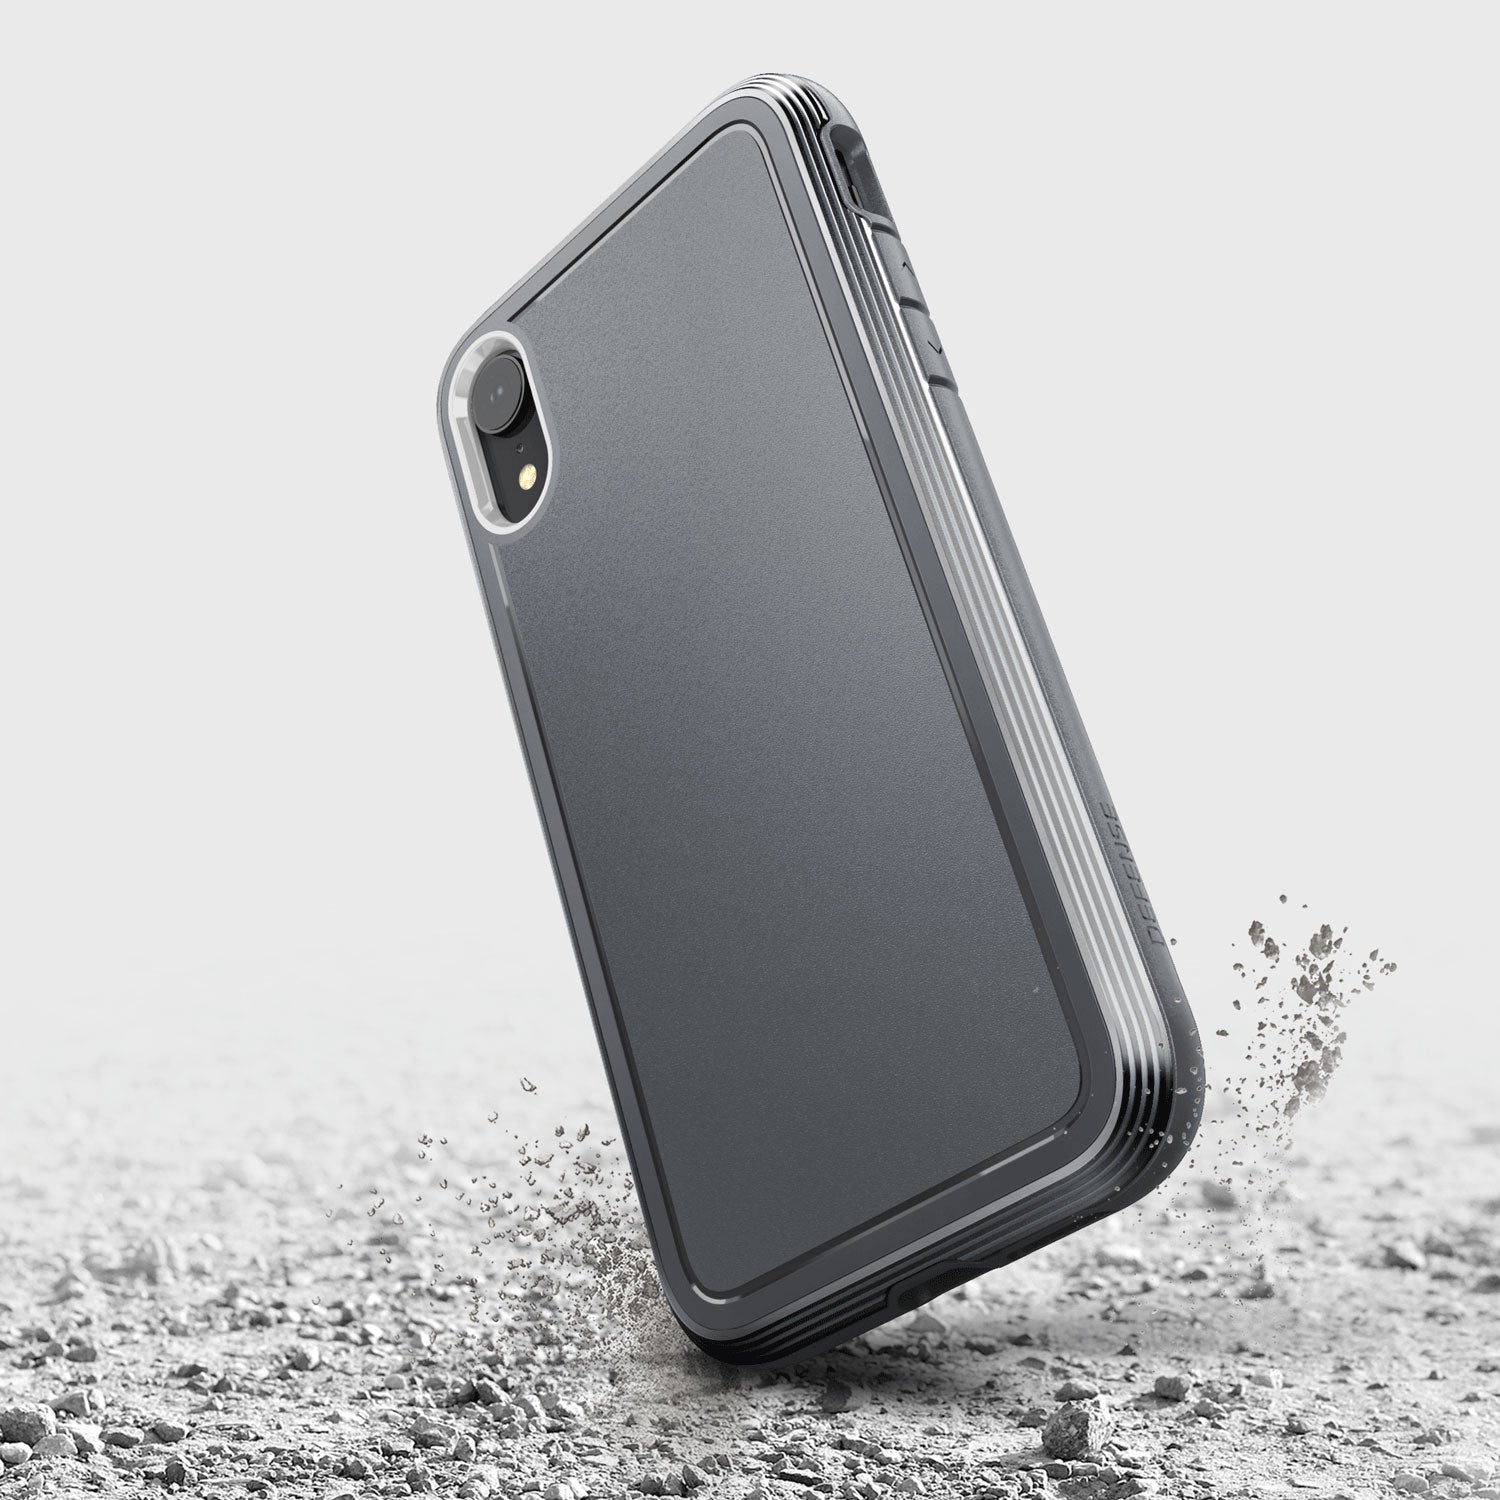 The back of an iPhone XR case, specifically the Raptic ULTRA case, is seen lying on the ground.